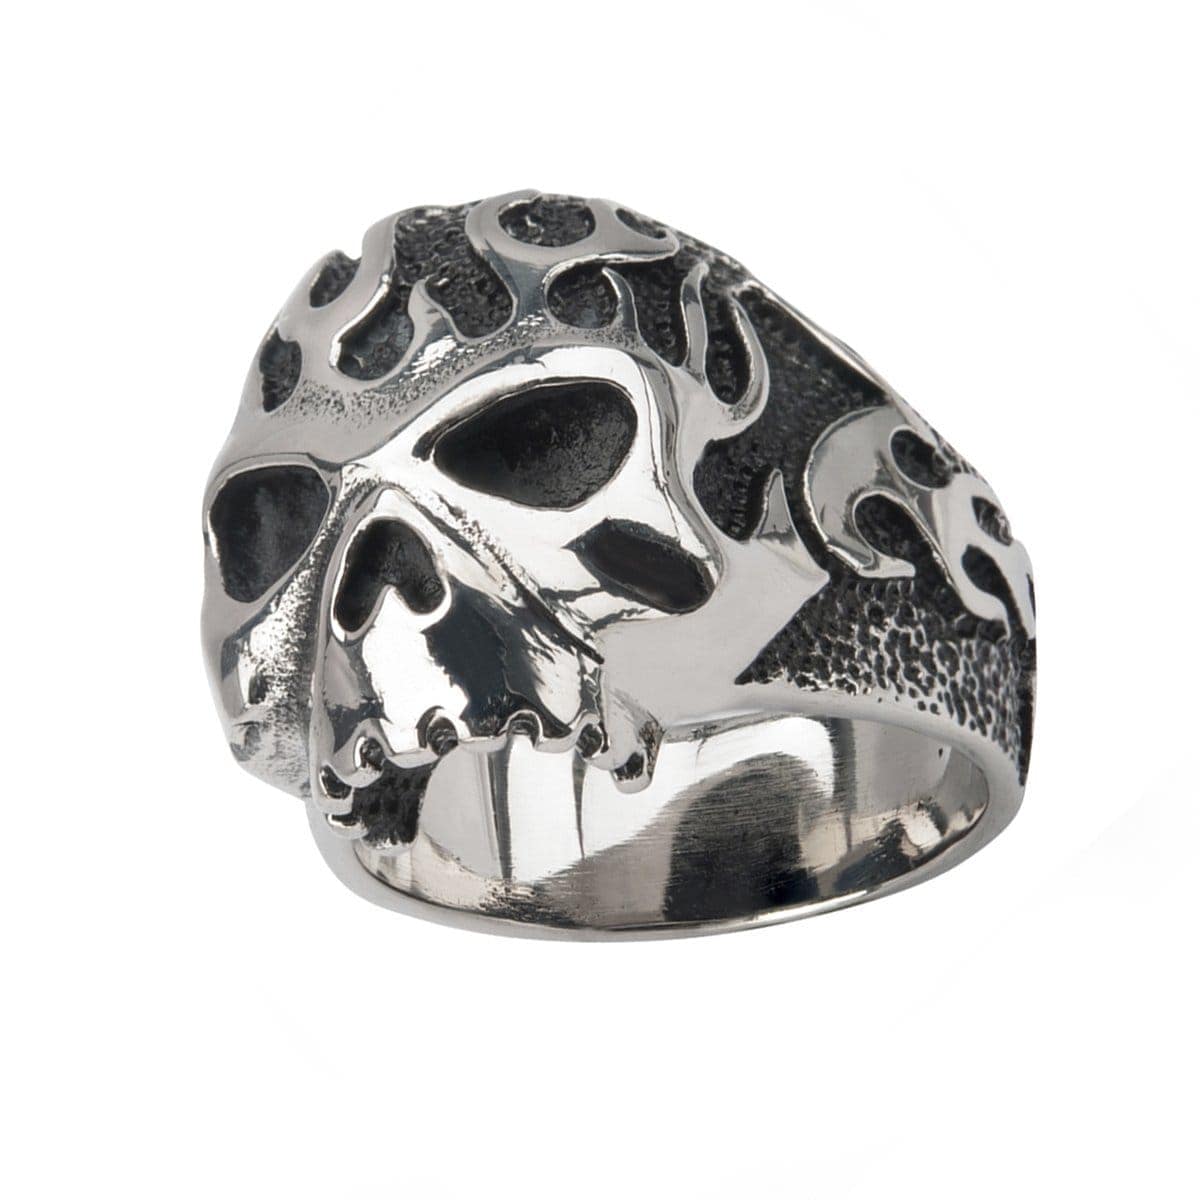 INOX JEWELRY Rings Antiqued Silver Tone Stainless Steel Flaming Skull Ring